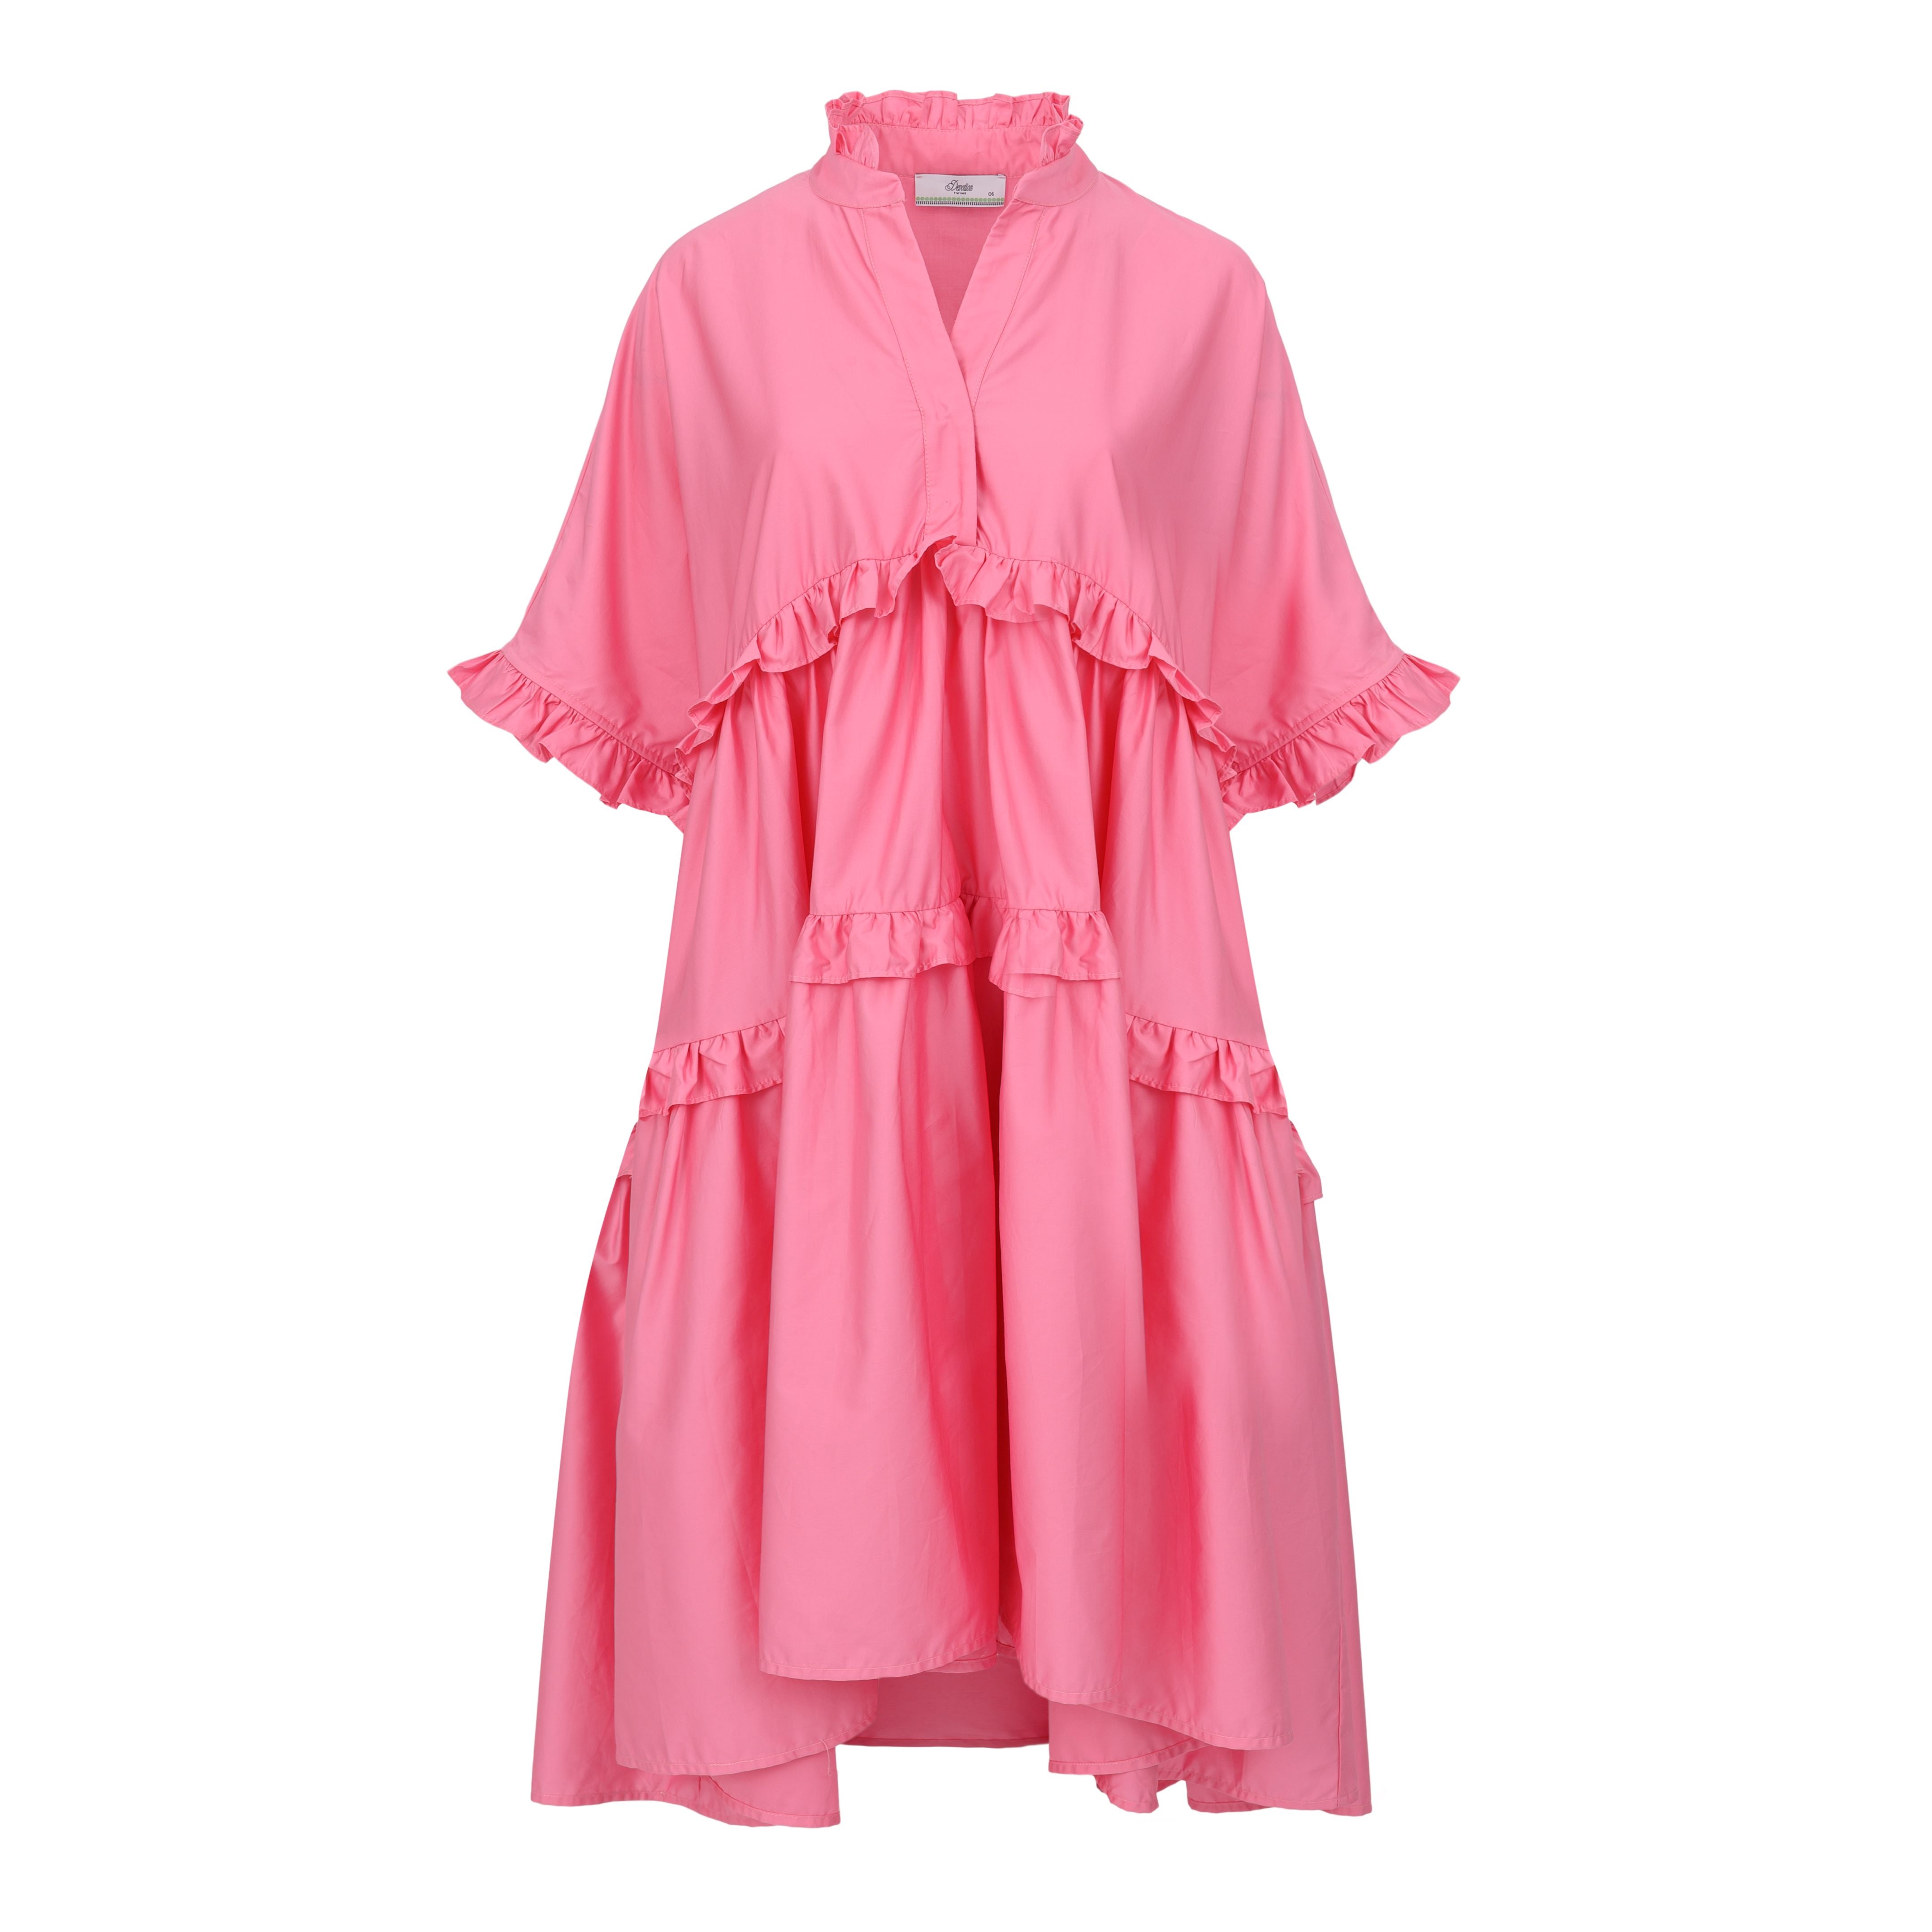 Devotion Twins Petinos Dress In Pink 022303g